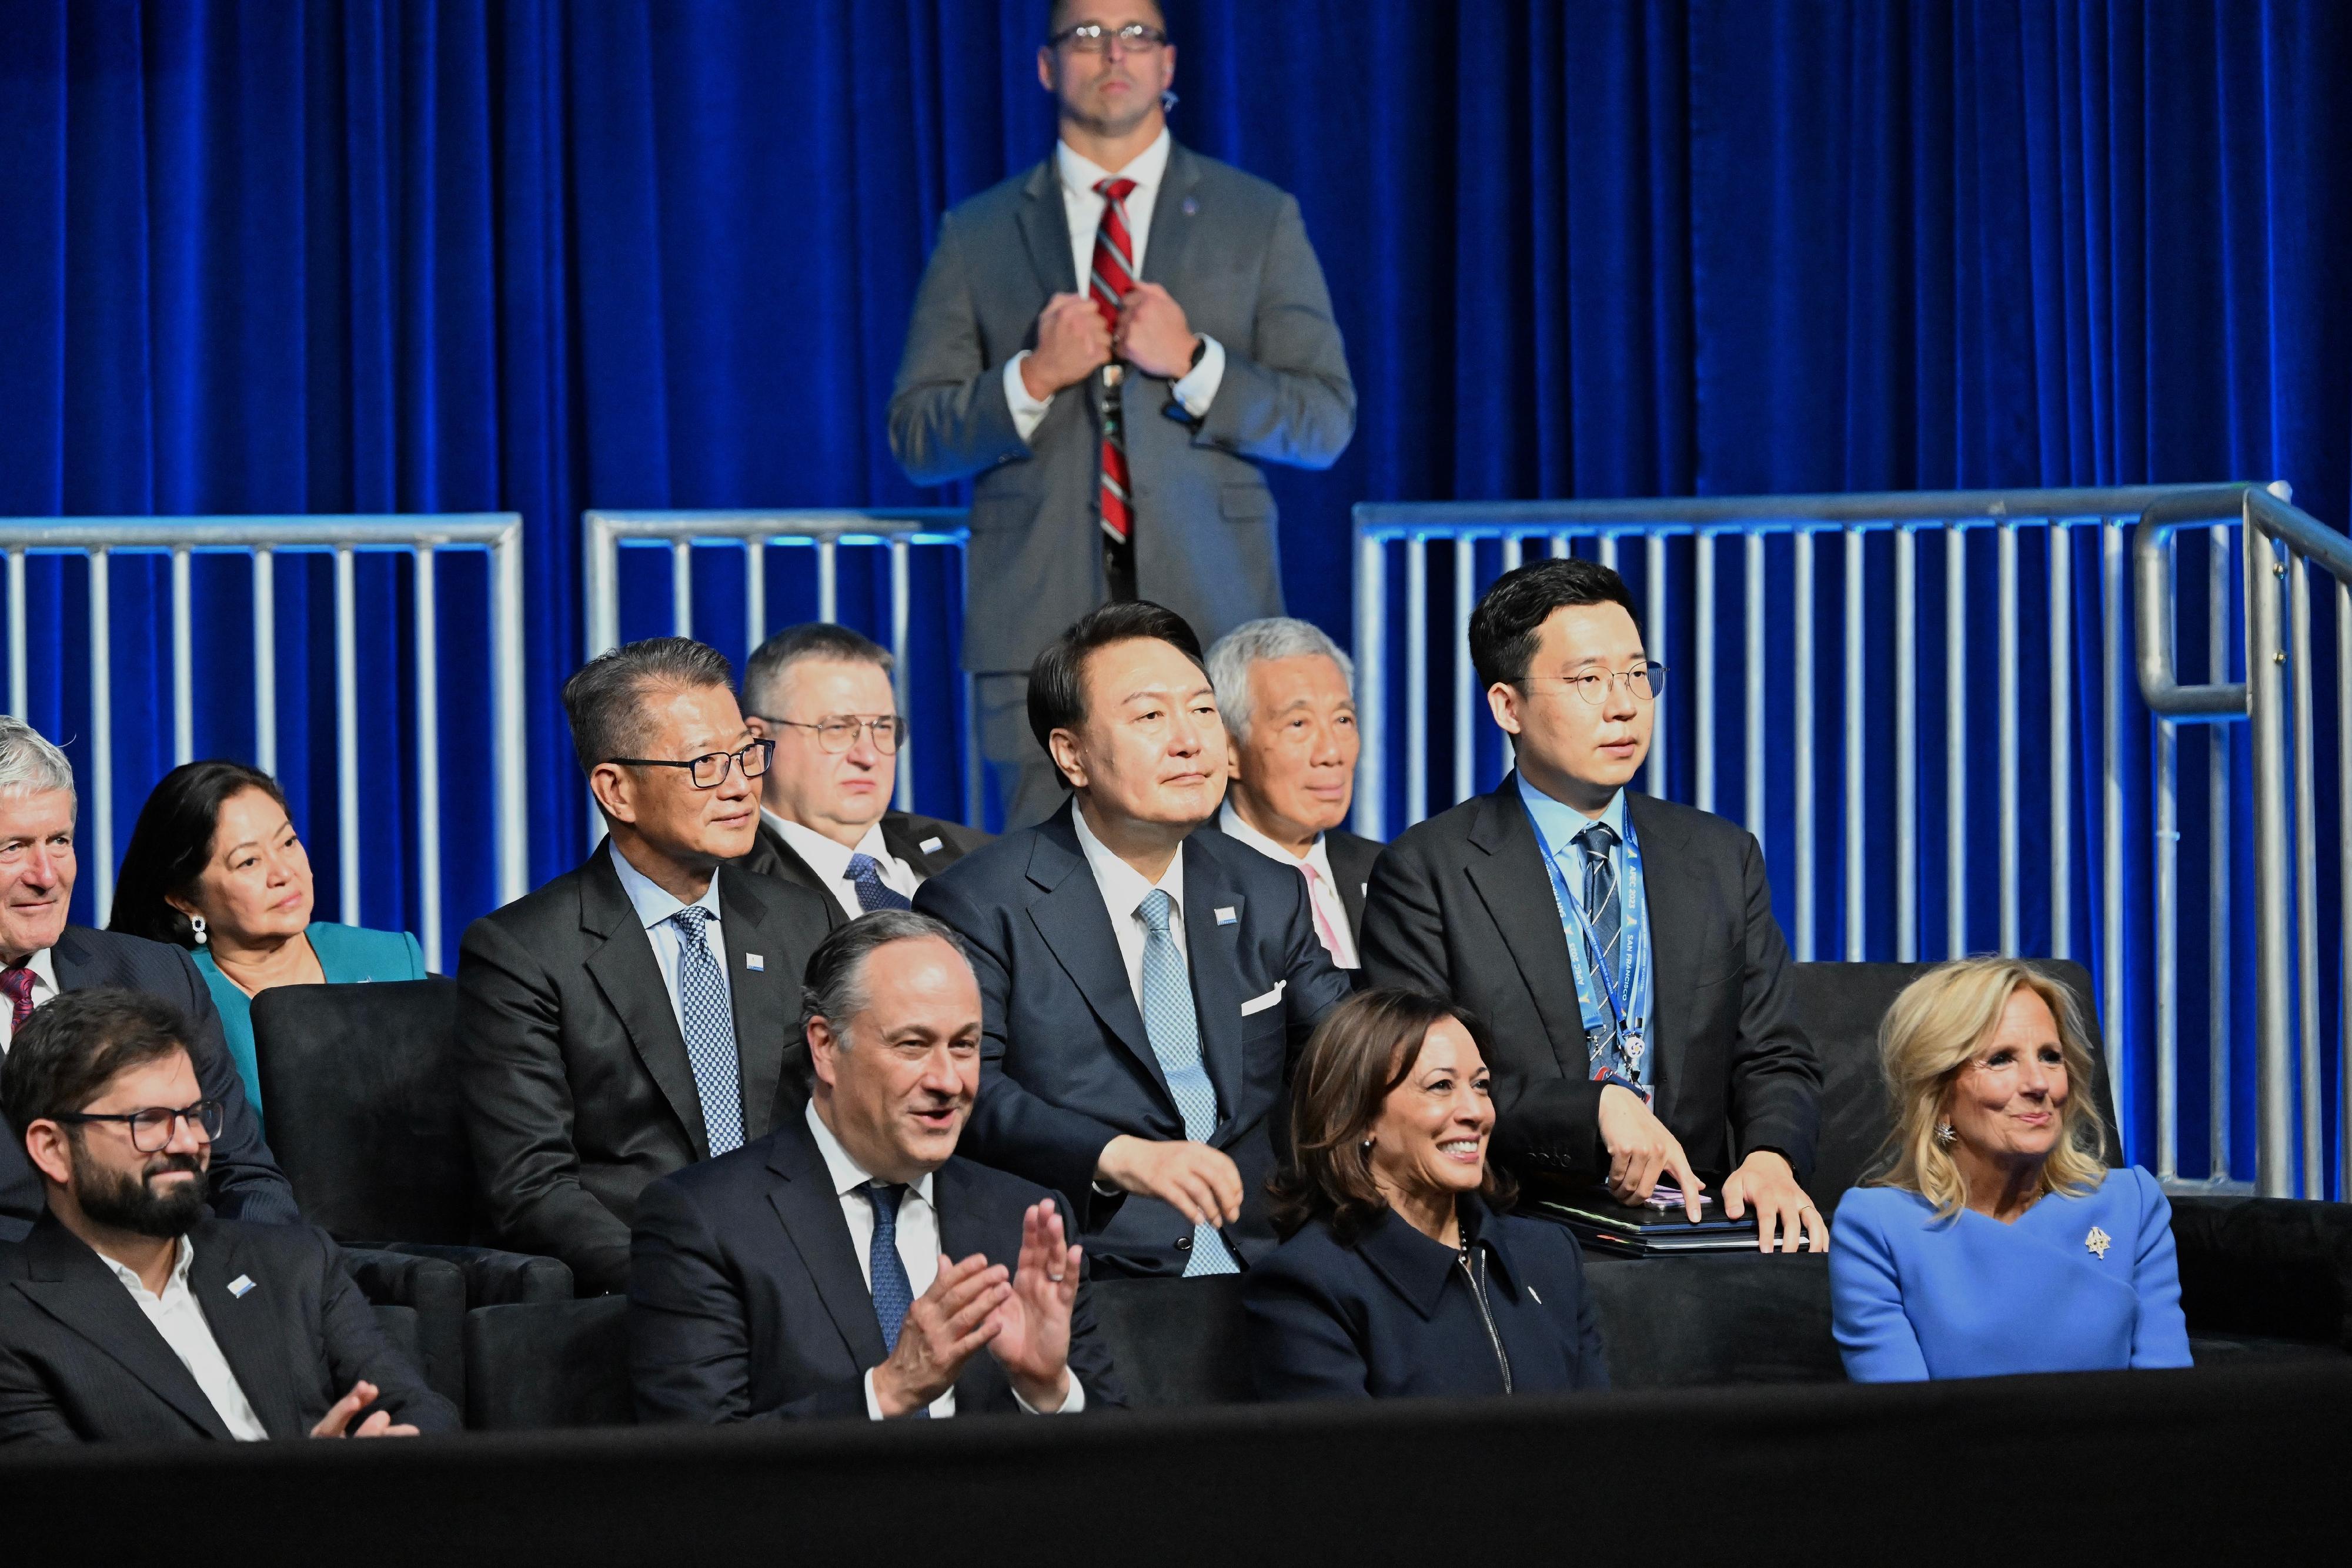 The Financial Secretary, Mr Paul Chan, attended the Asia-Pacific Economic Cooperation Economic Leaders' Meeting welcome reception in San Francisco, the United States, yesterday evening (November 15, San Francisco time). Photo shows Mr Chan (second row, third right) and other leaders at the welcome reception.